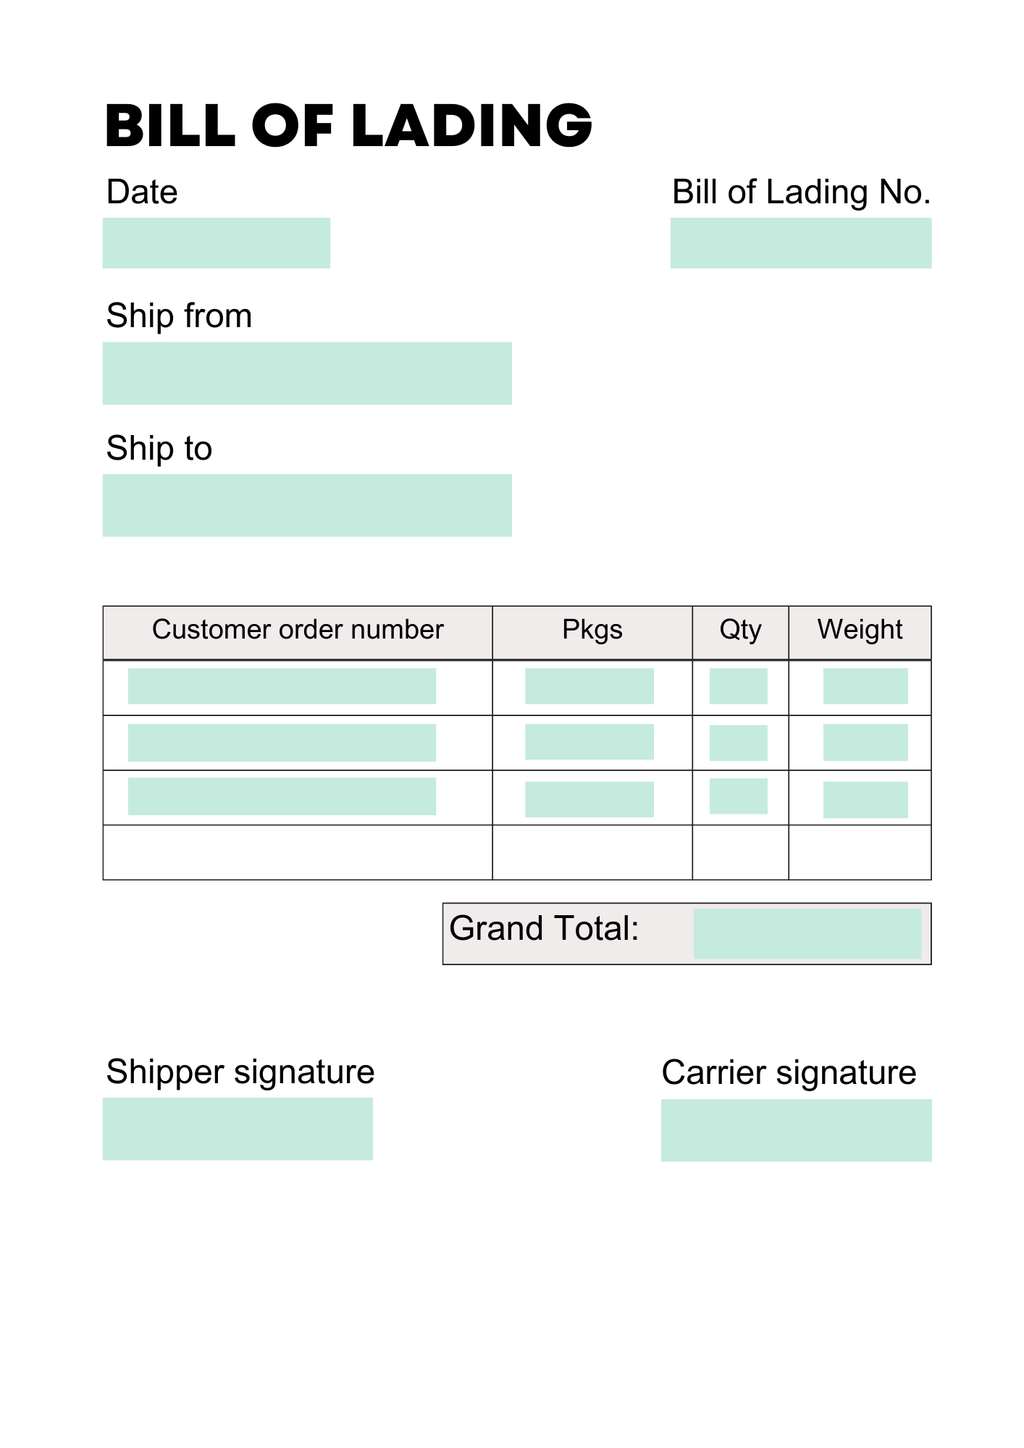 a visual representing a standard bill of lading